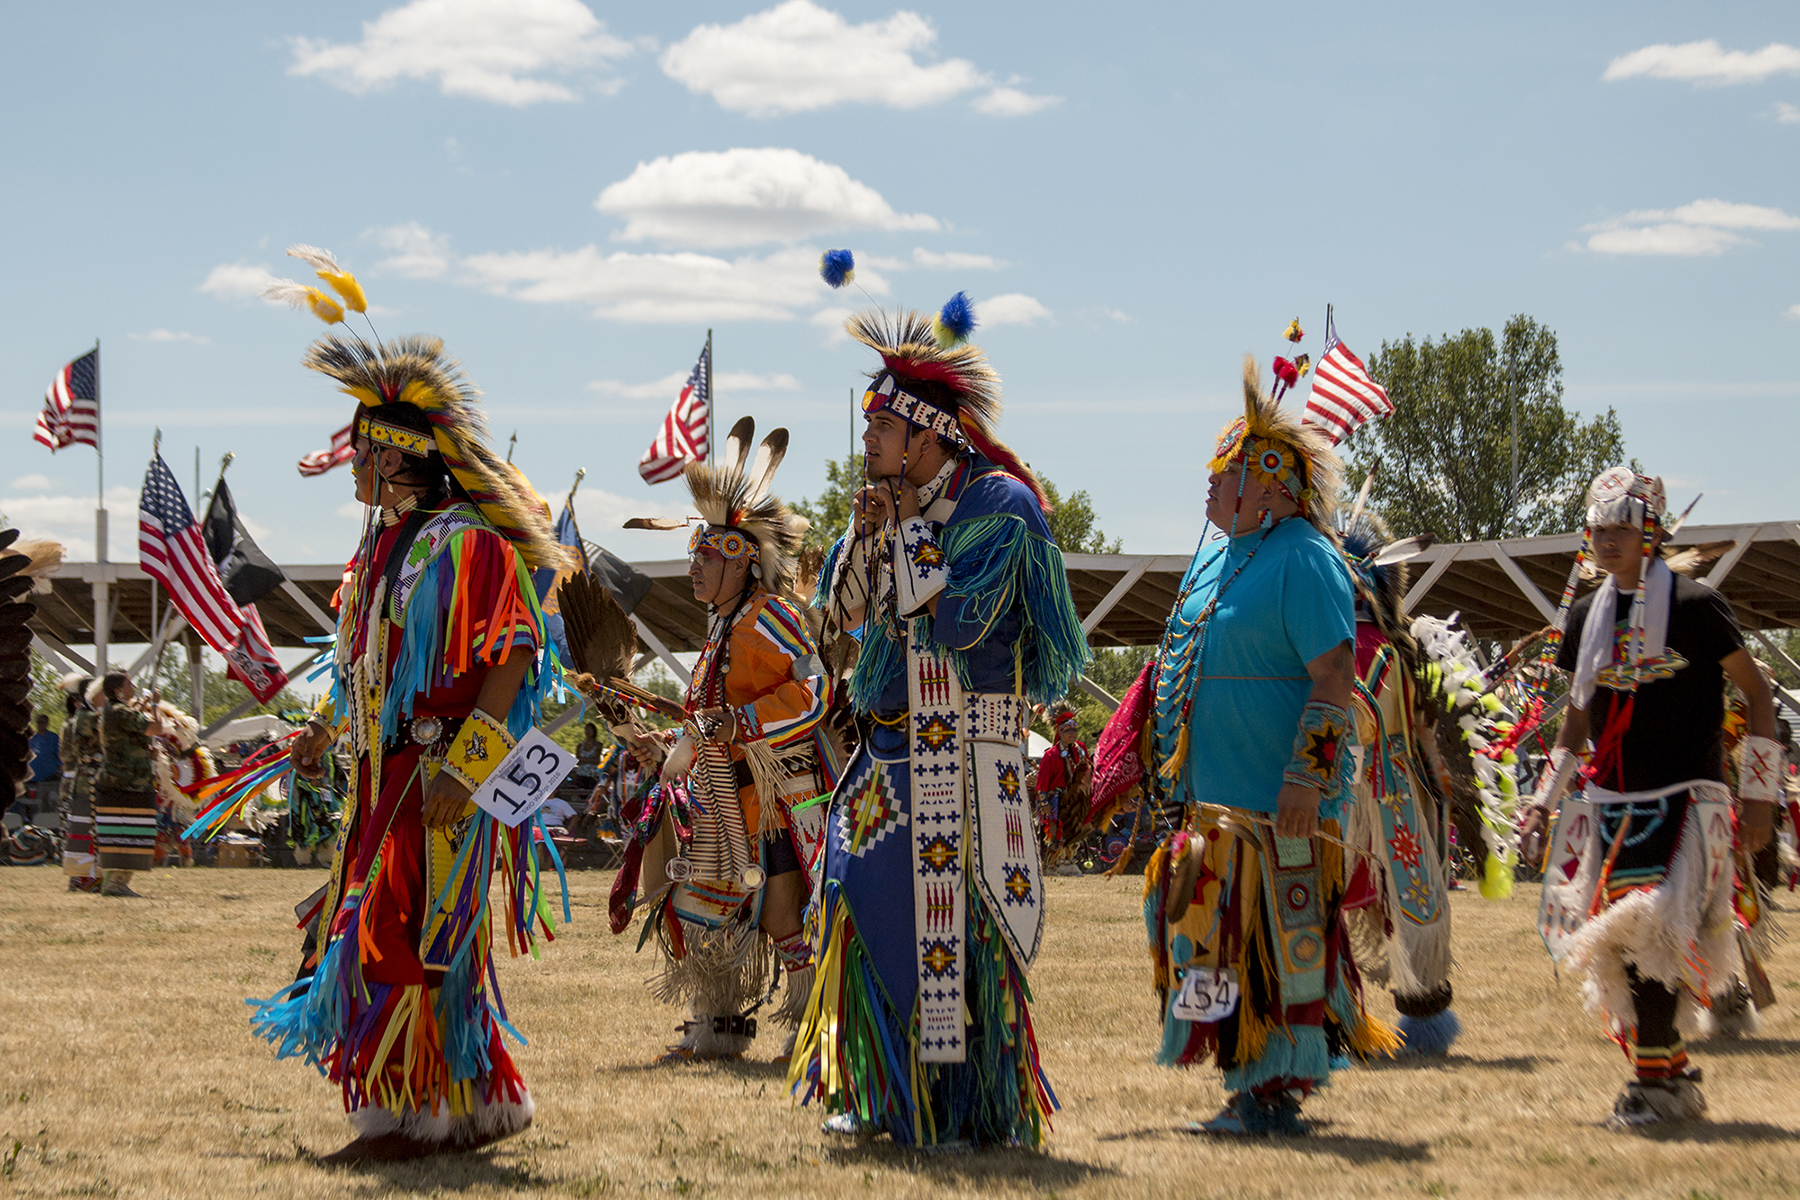 The Sisseton Wahpeton Oyate tribe conducted its 149th annual Wacipi, also known as a powwow, during the Fourth of July weekend in South Dakota. It is the second-oldest Wacipi in the nation. It was once illegal for tribes to practice their religious ceremonies, so they passed off their cultural celebration as a Fourth of July festivity. (Mike Lakusiak/News21)